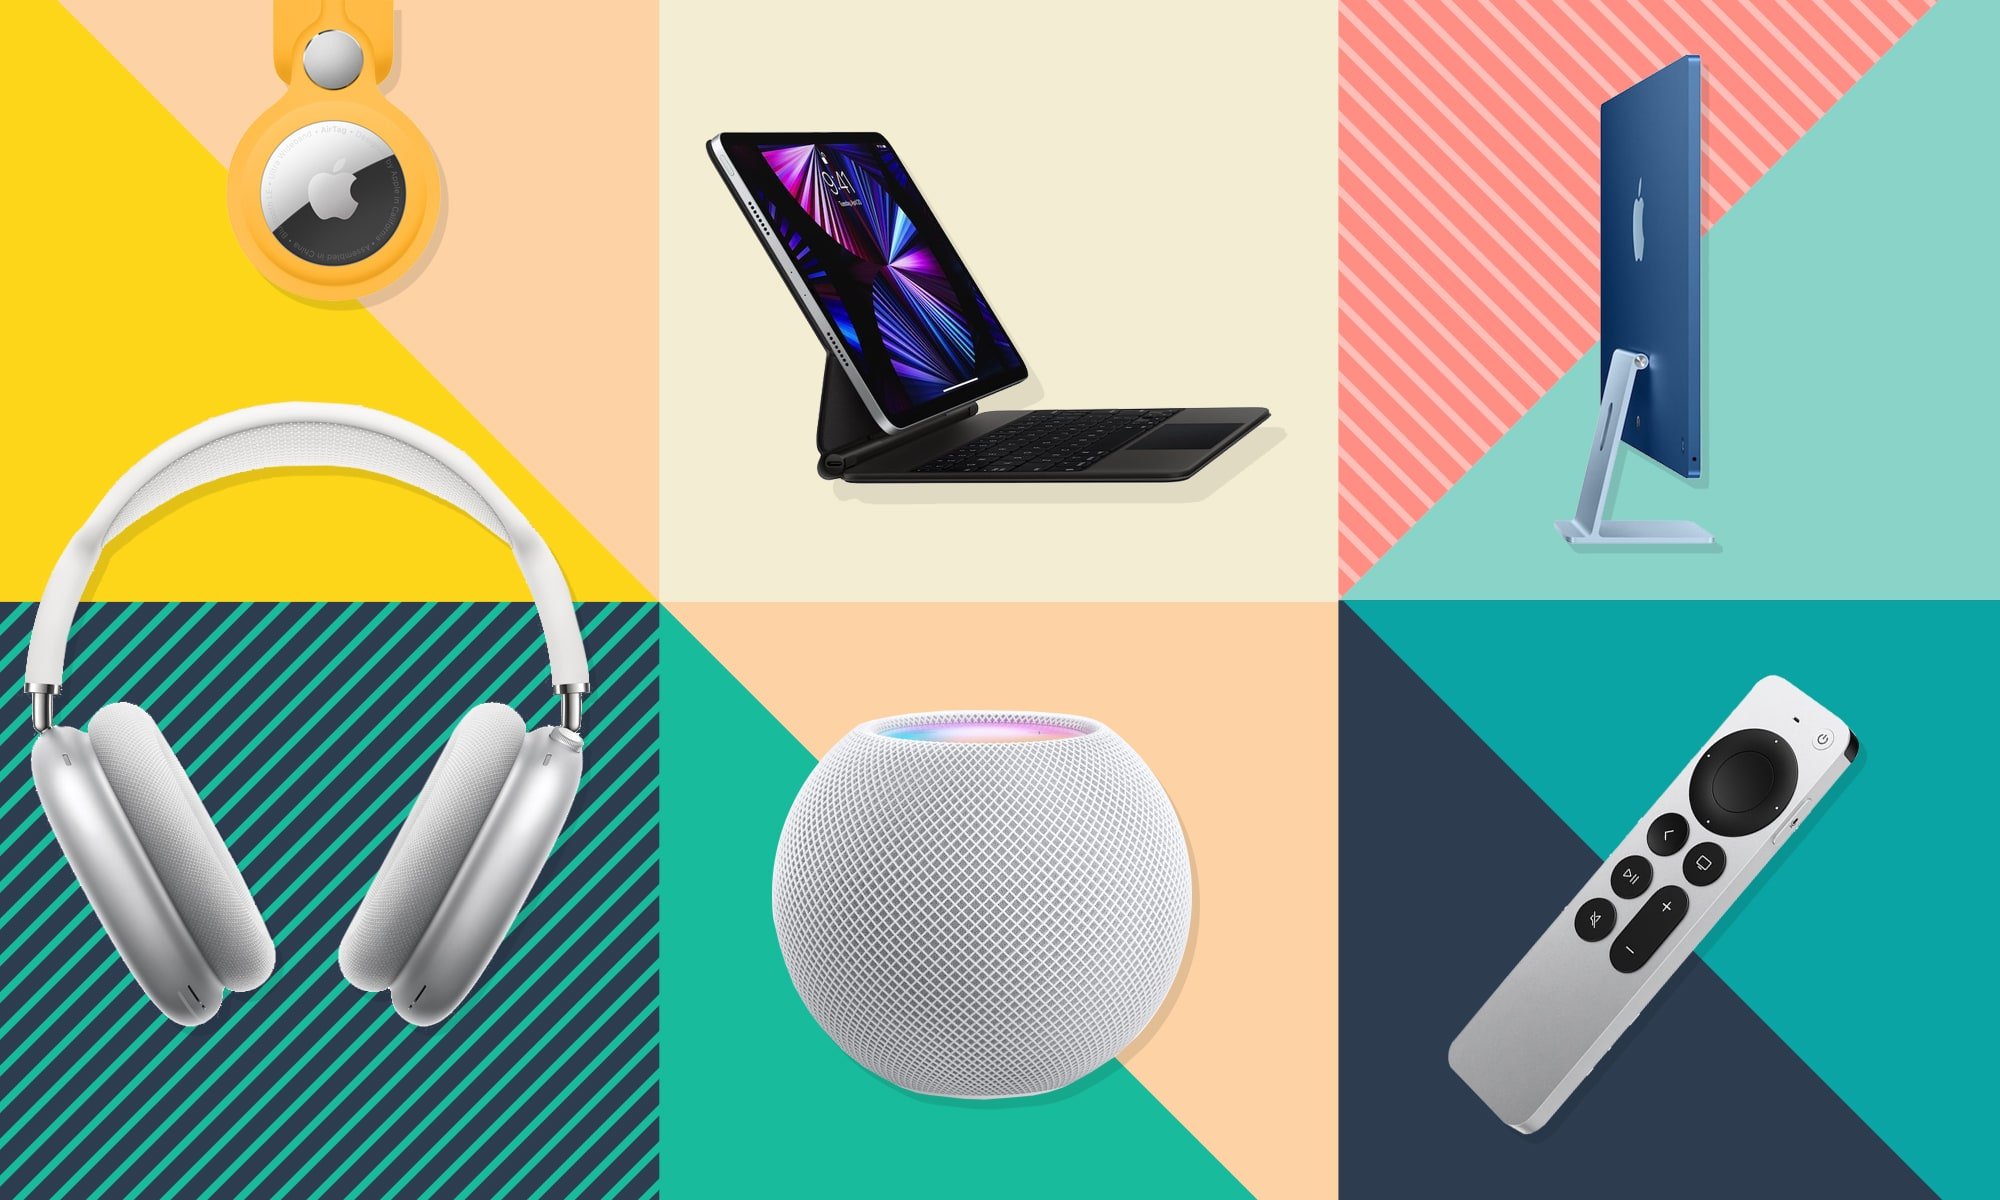 The best Apple gadgets and accessories to buy in 2021: stands, cases, chargers, etc.